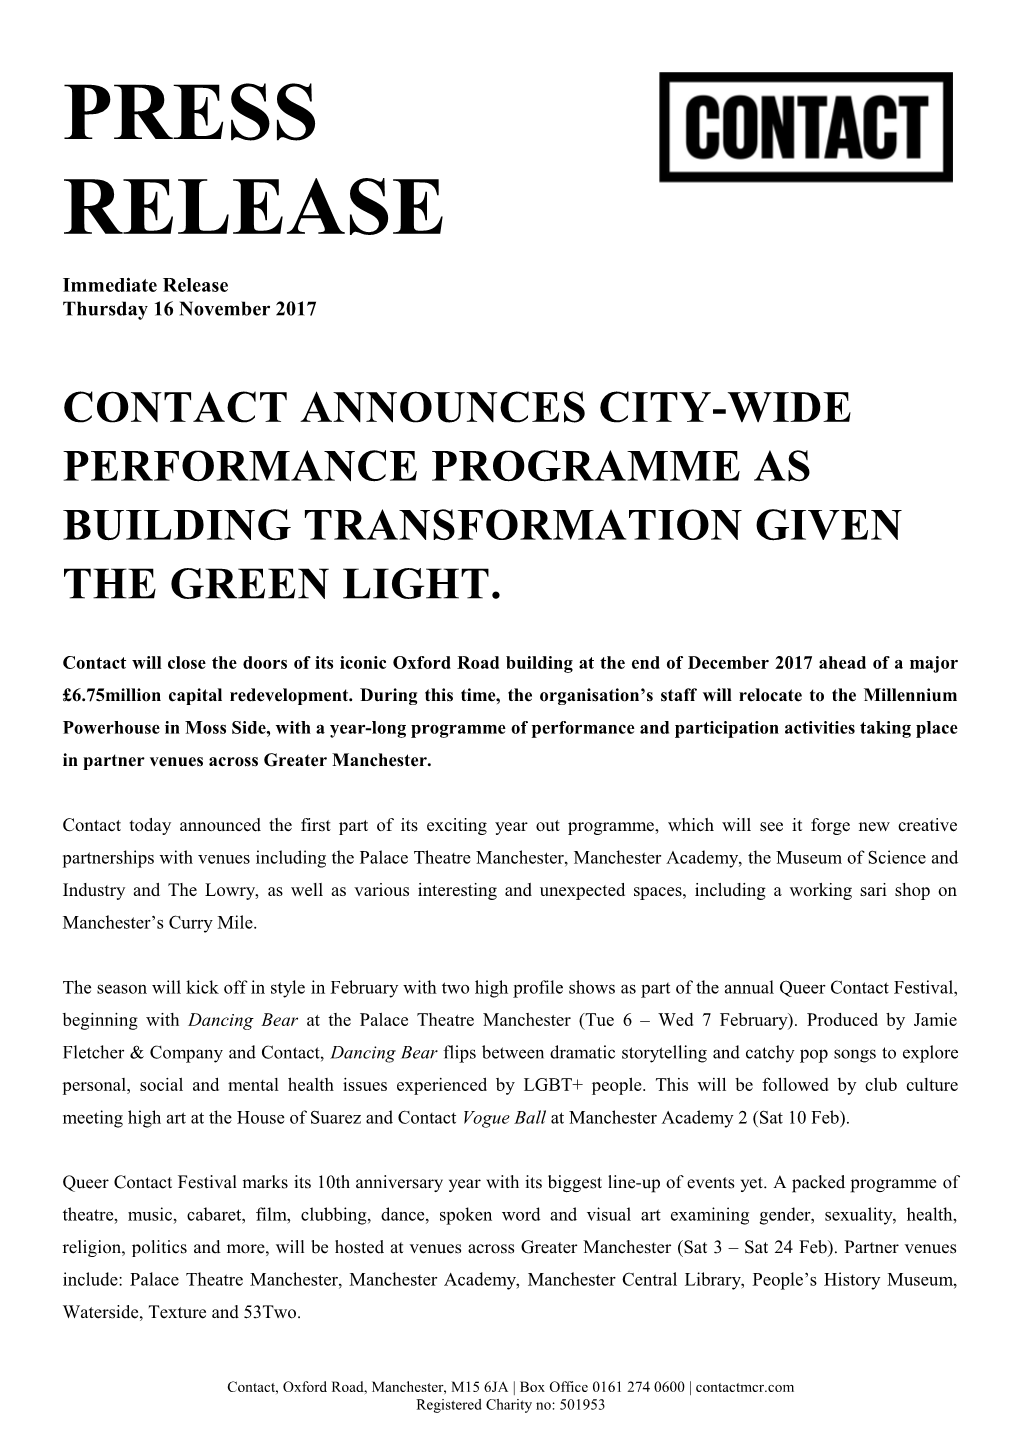 Contact Announces City-Wide Performance Programme As Building Transformation Given The